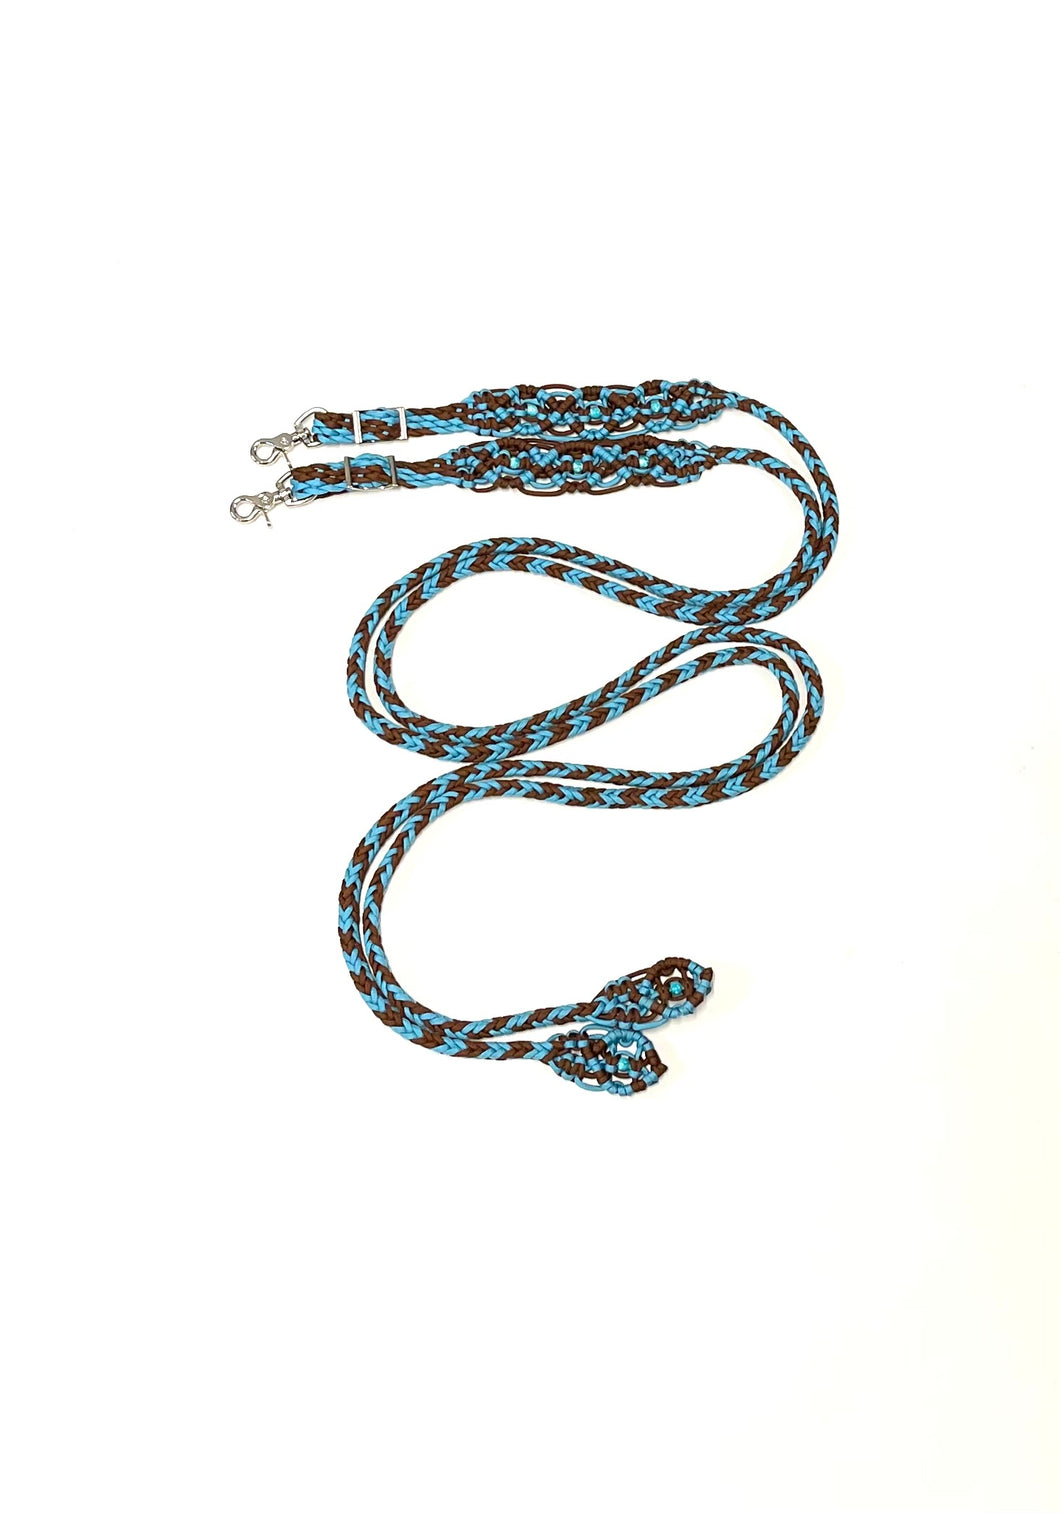 Fancy turquoise and brown braided split reins with beading....beautiful yet practical